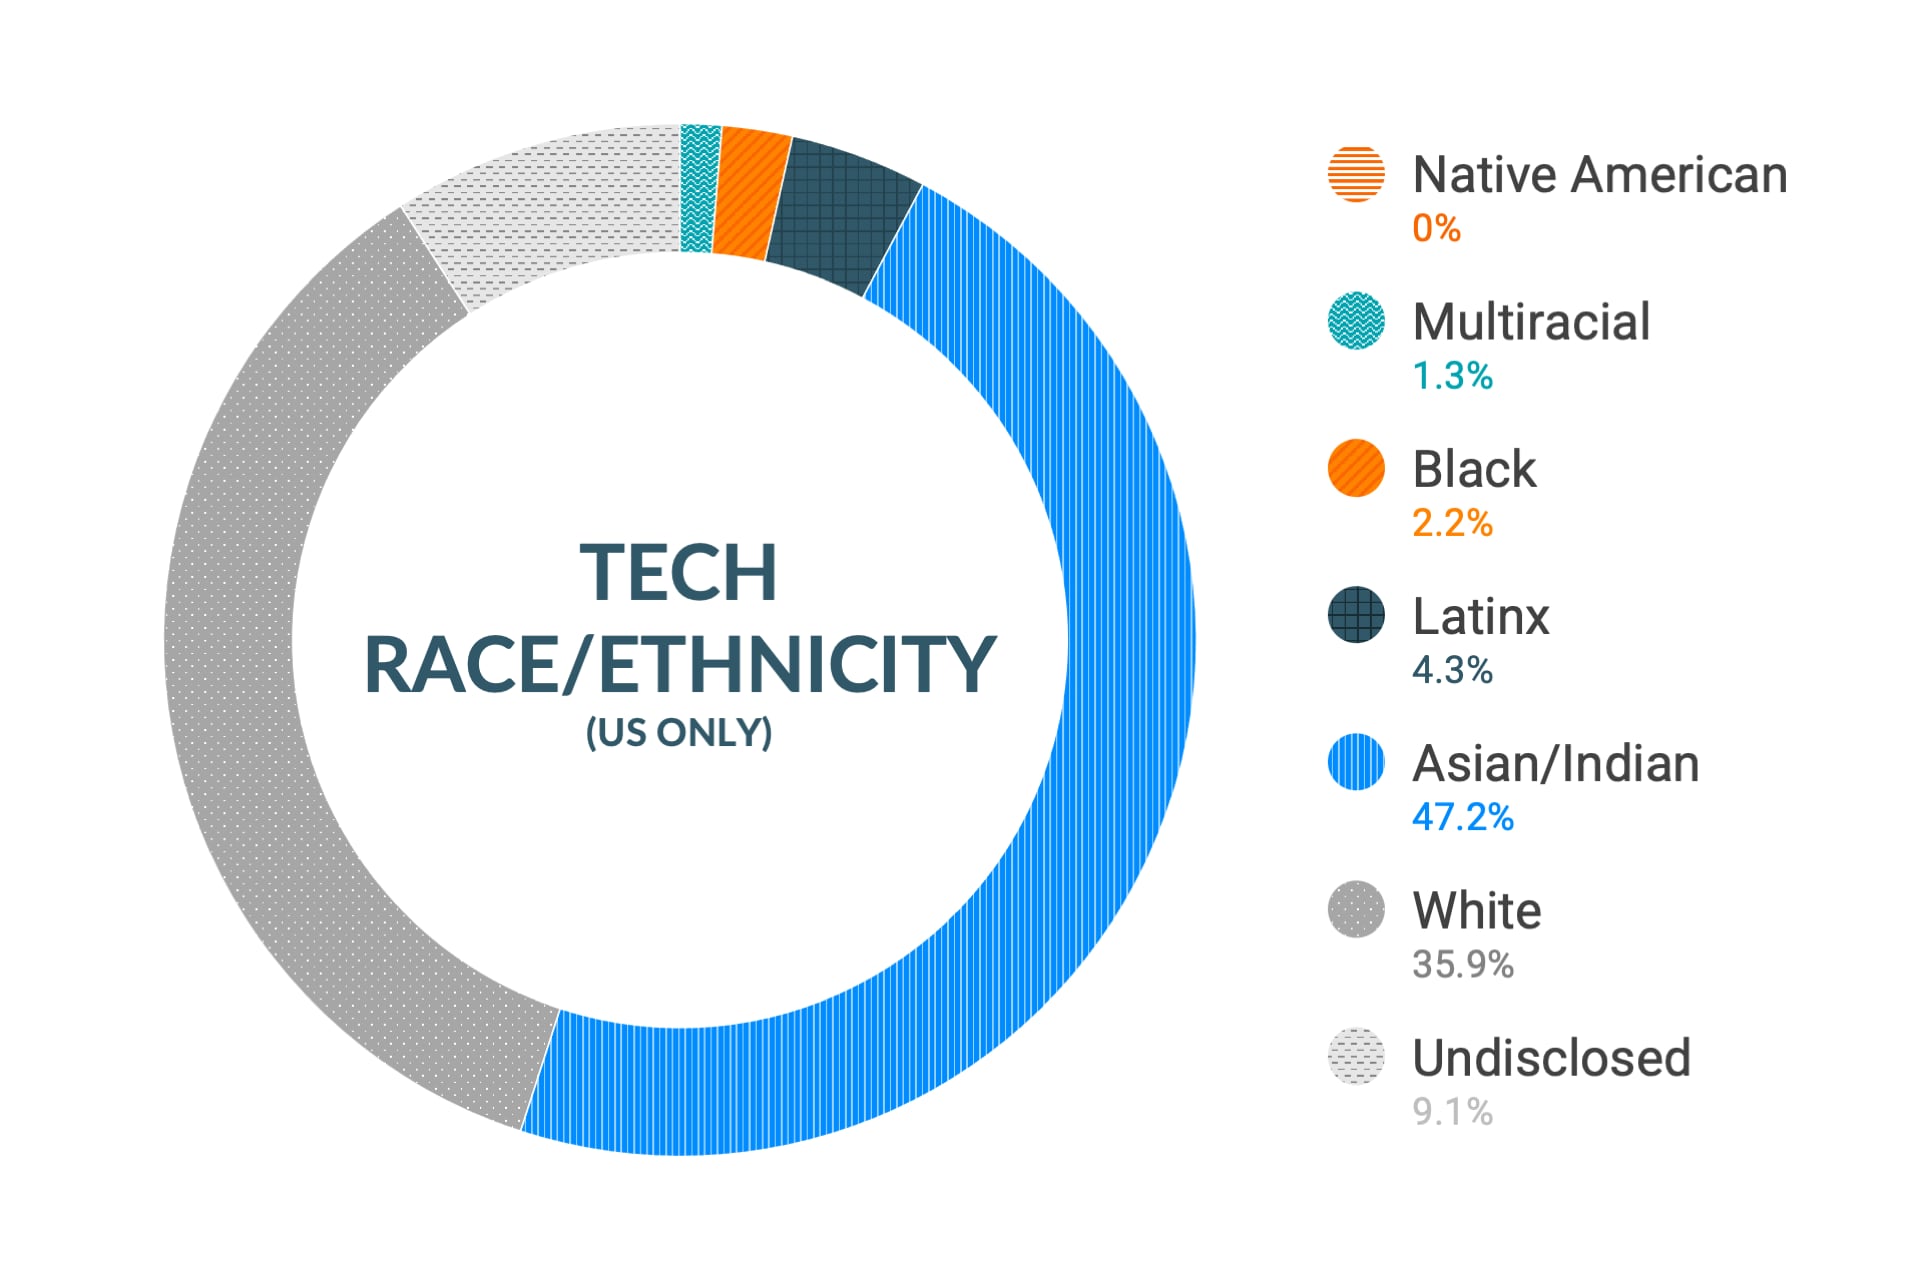 Cloudera Diversity and Inclusion data for Race and Ethnicity in U.S. Technical and Engineering Roles: Native American 0%, Multiracial 1.6%, Black 2.1%, Latinx 3.3%, Asian and Indian 46.6%, White 37.2%, Undisclosed 9.2%